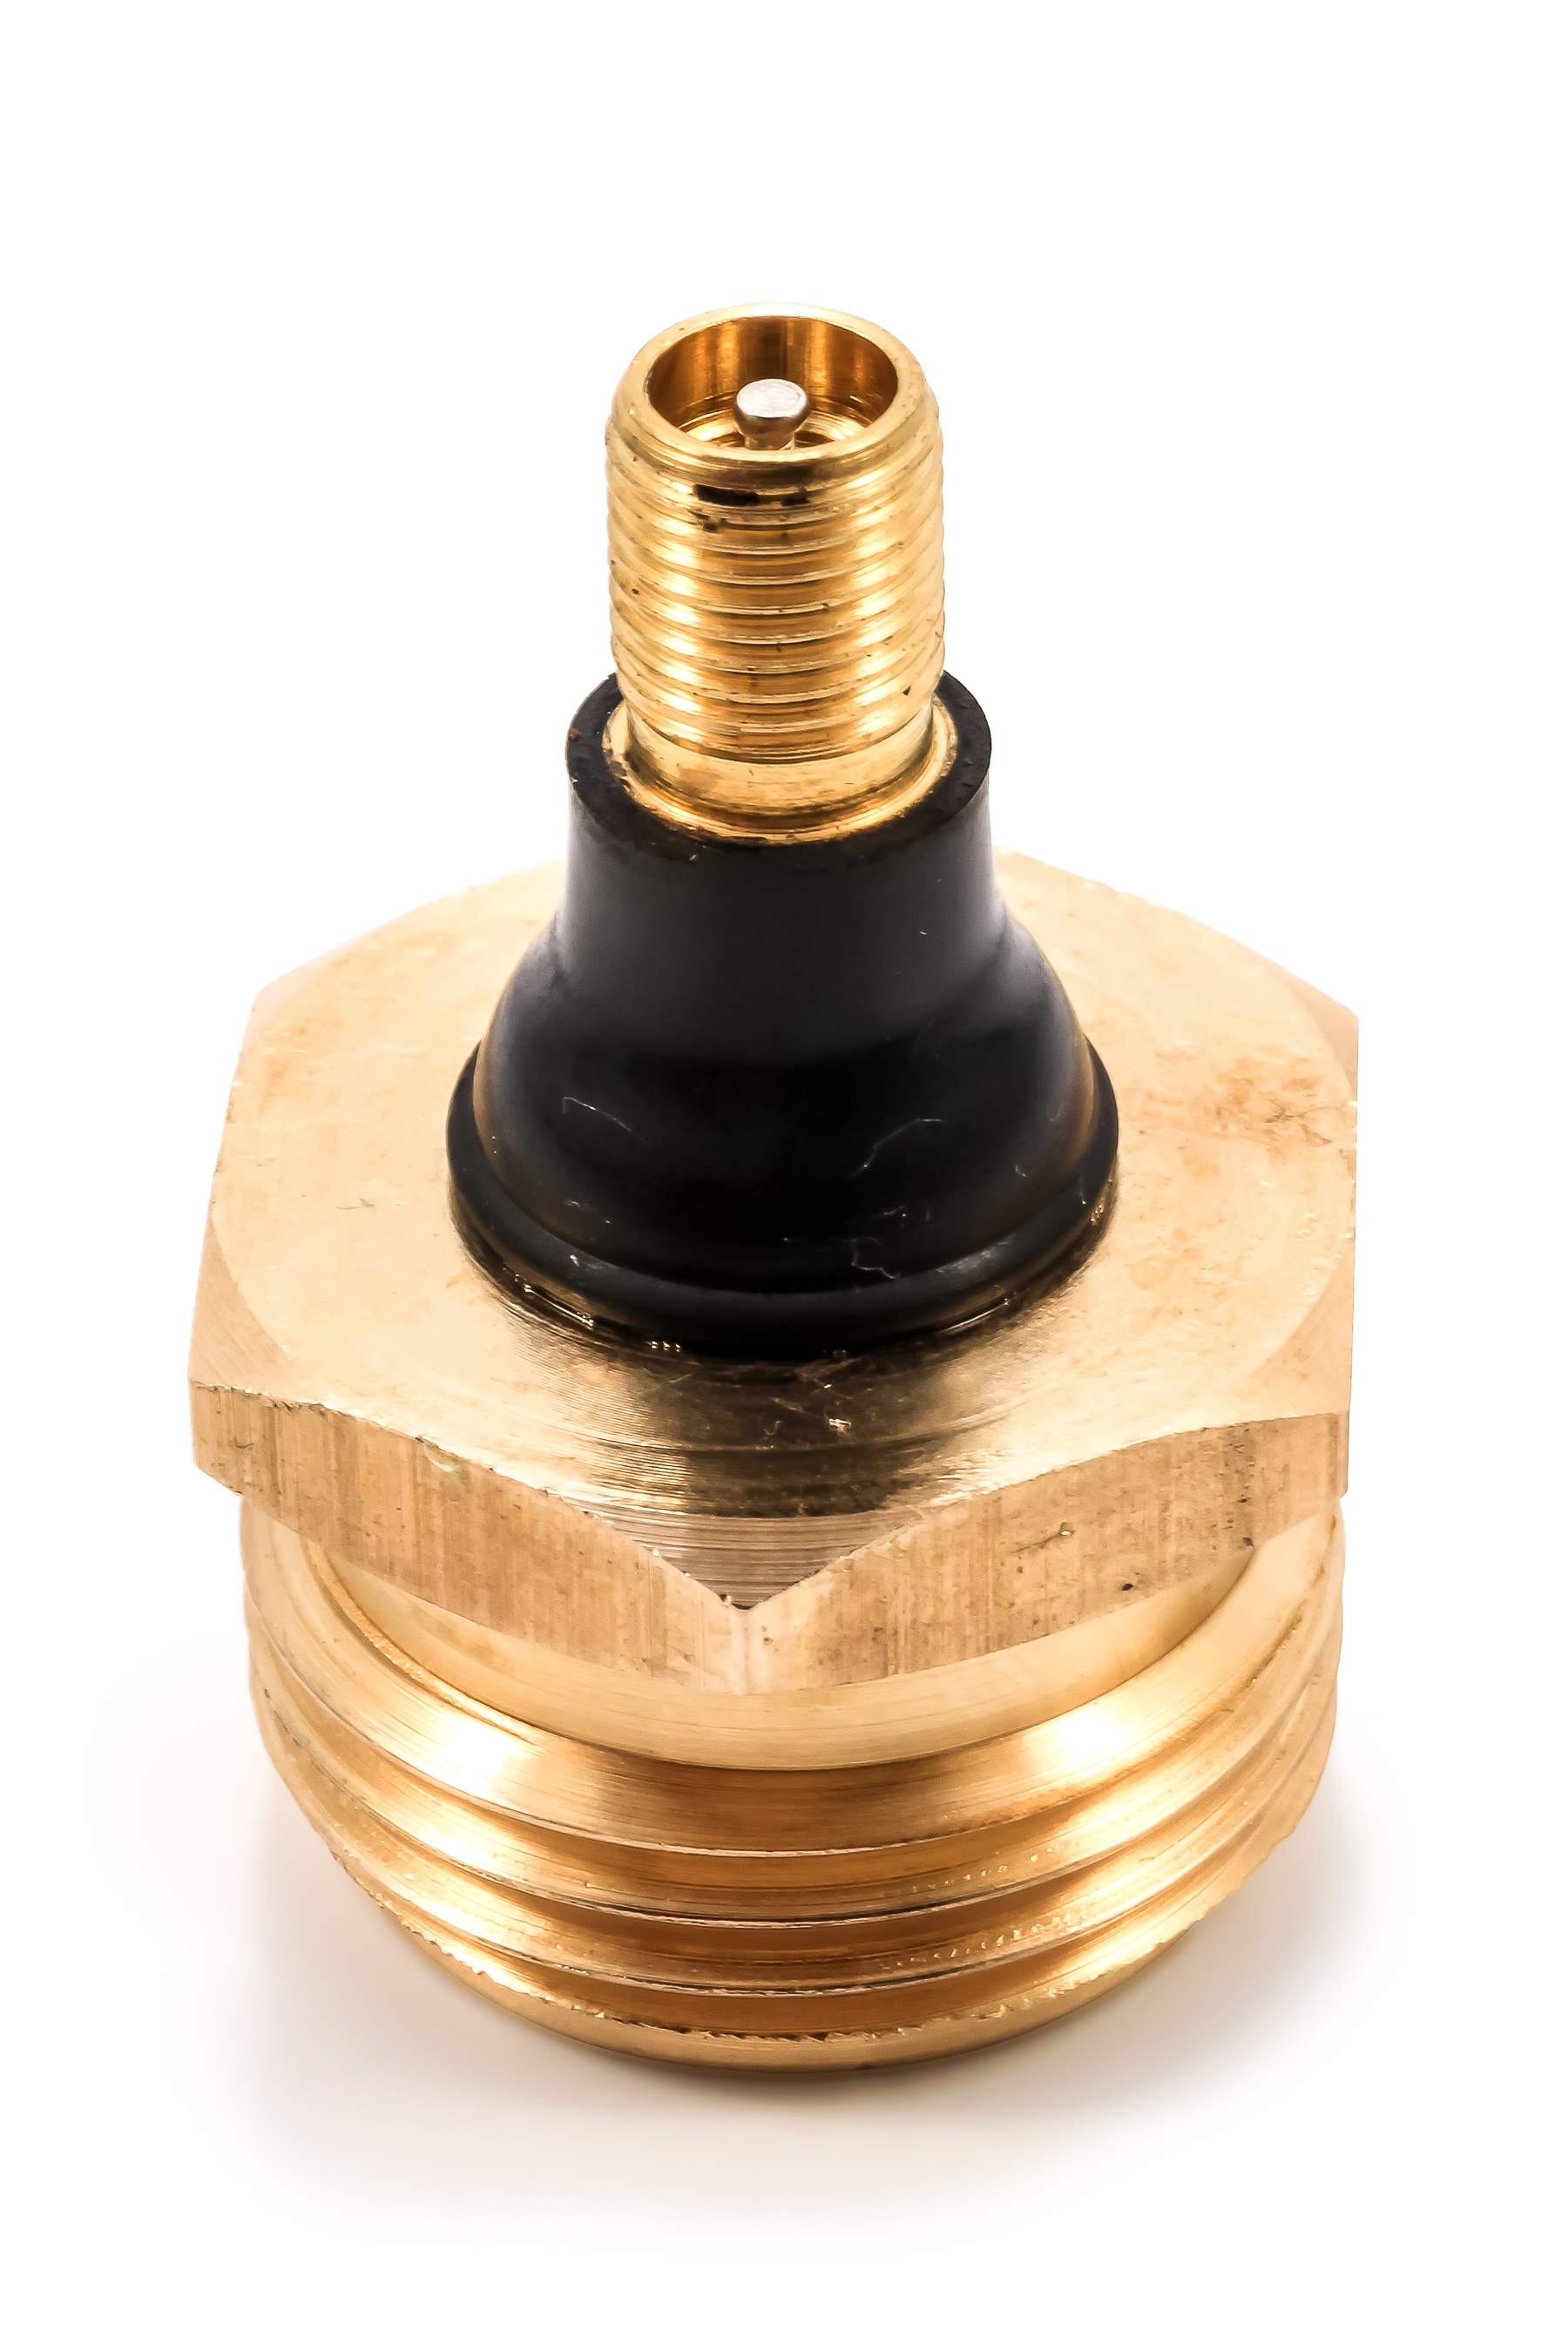 Camco 36153 Brass Blow Out Plug for RV Winterizing - image 4 of 9